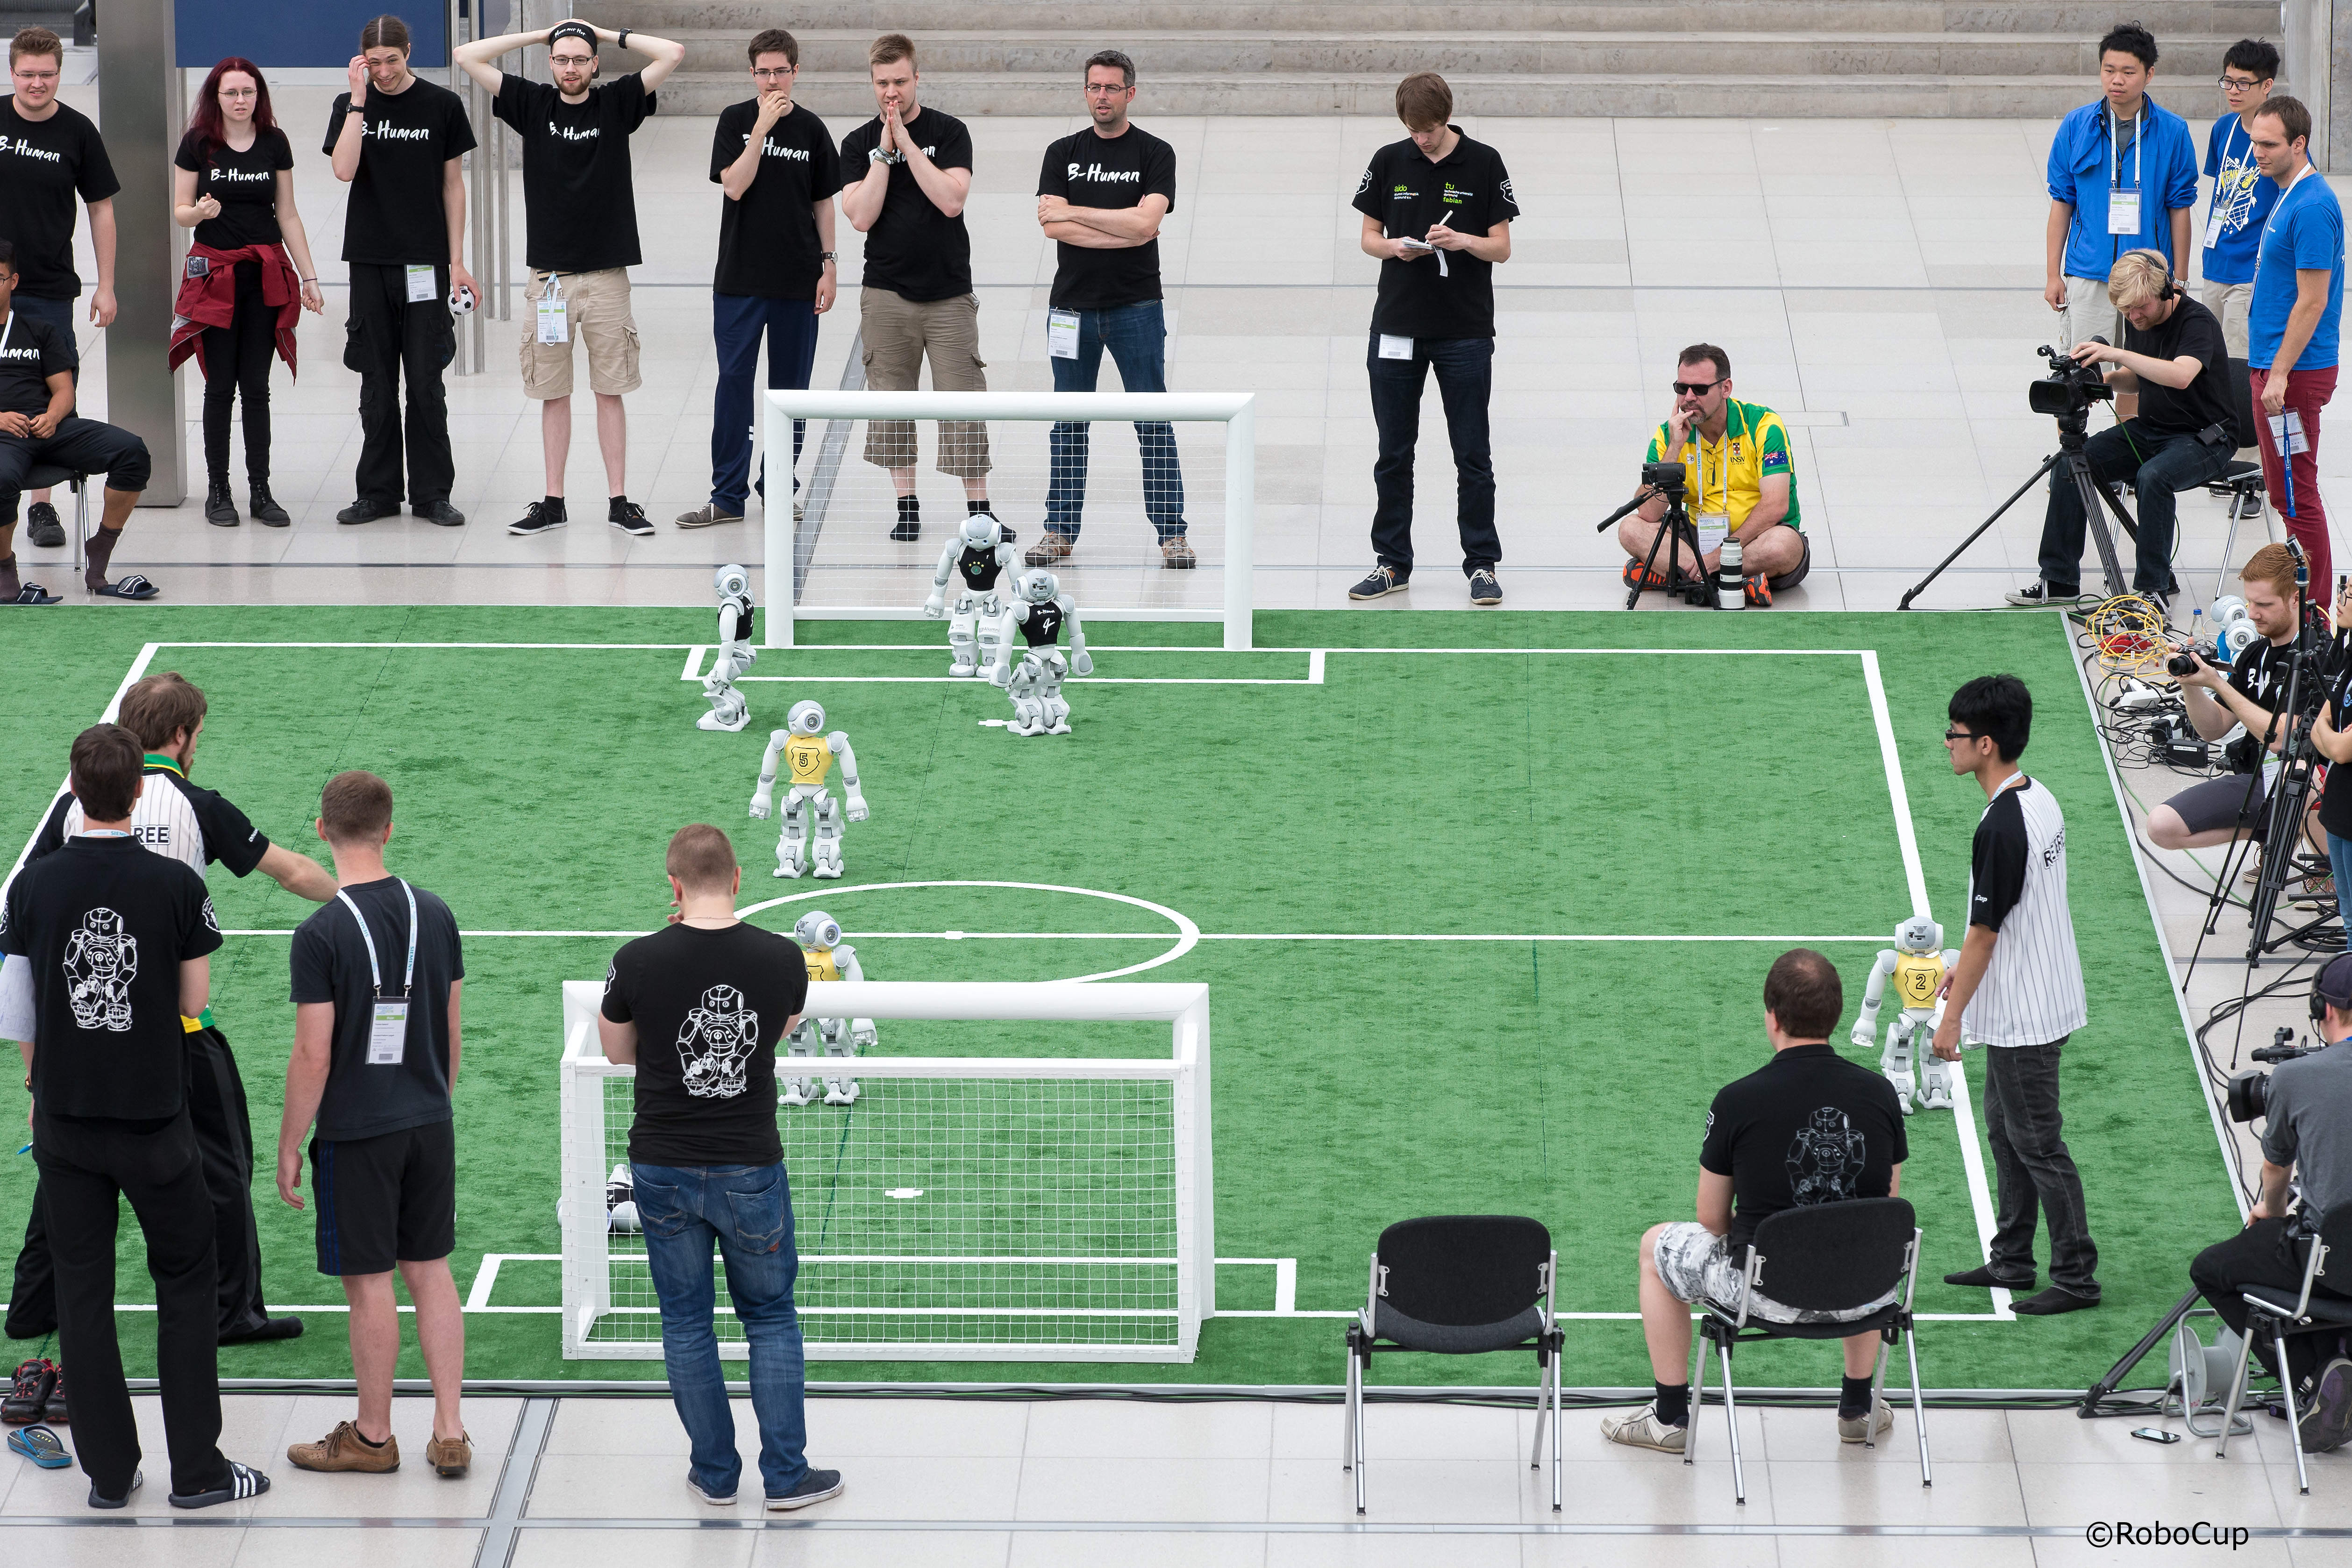 Robocup2016 in Leipzig